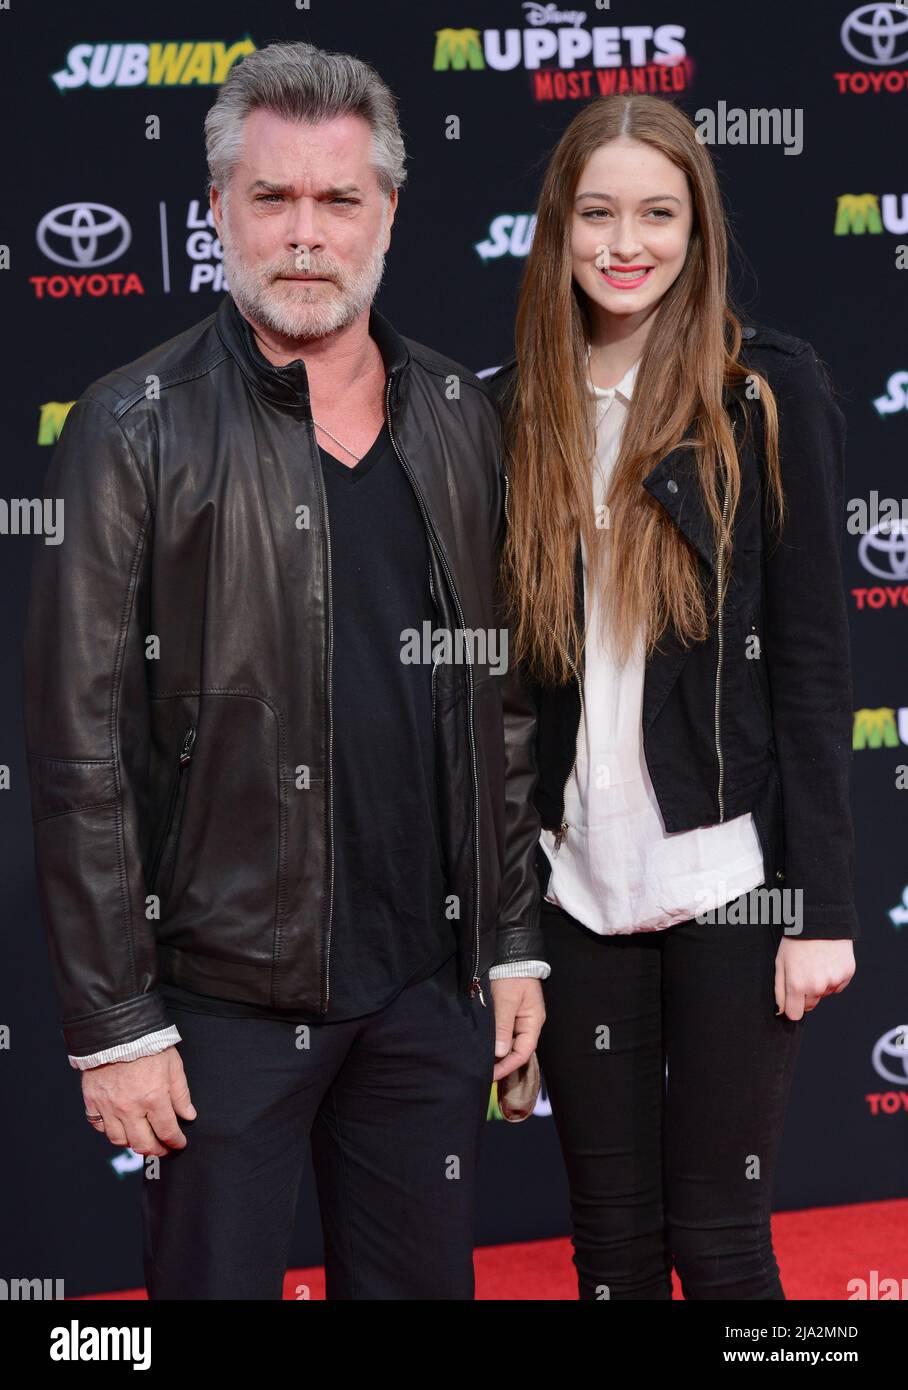 Los Angeles, USA. 11th Mar, 2014. Ray Liotta and daughter Karsen Liotta arriving at the Muppets Most Wanted Premiere at the El Capitan Theatre in Los Angeles.Ray Liotta and daughter Karsen Liotta 072 Ray Liotta, the actor best known for playing mobster has died. He was 67. Credit: Tsuni/USA/Alamy Live News Stock Photo